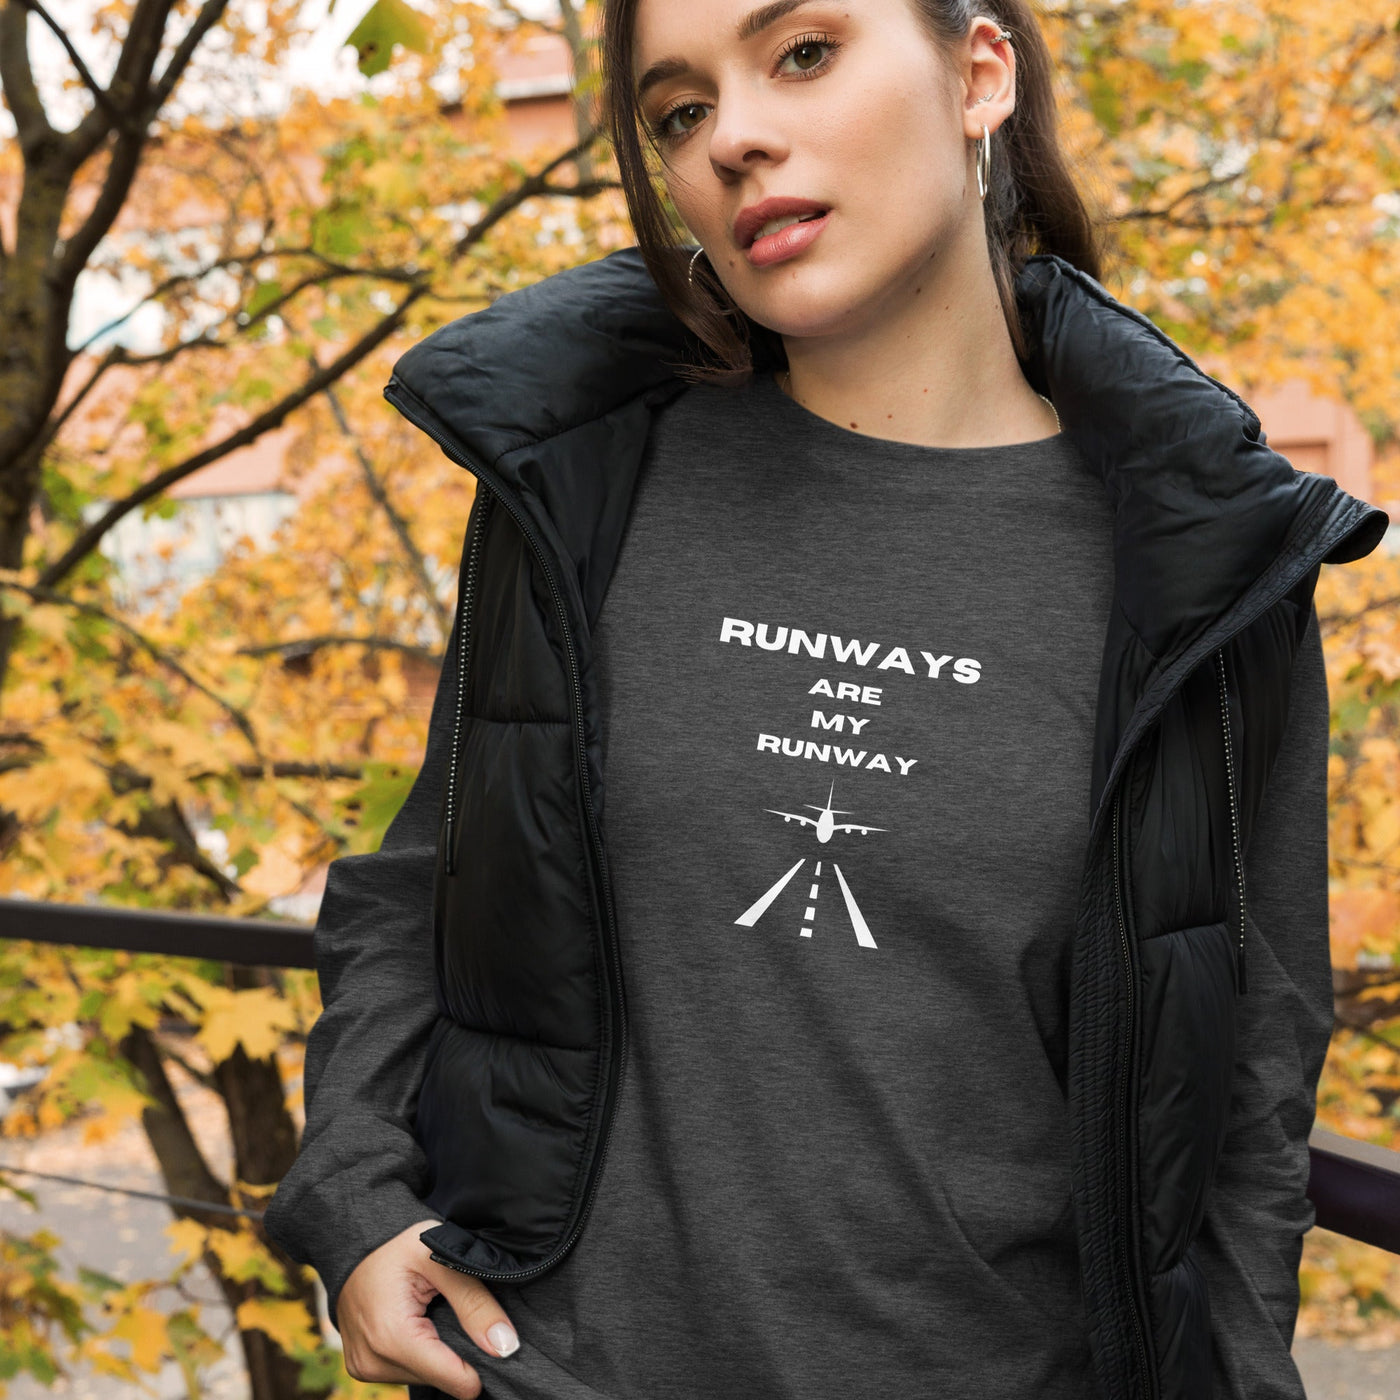 Get trendy with Unisex Long Sleeve Tee Runways are my Runway - Long-sleeve T-shirt available at SWCH Store. Grab yours for £25 today!